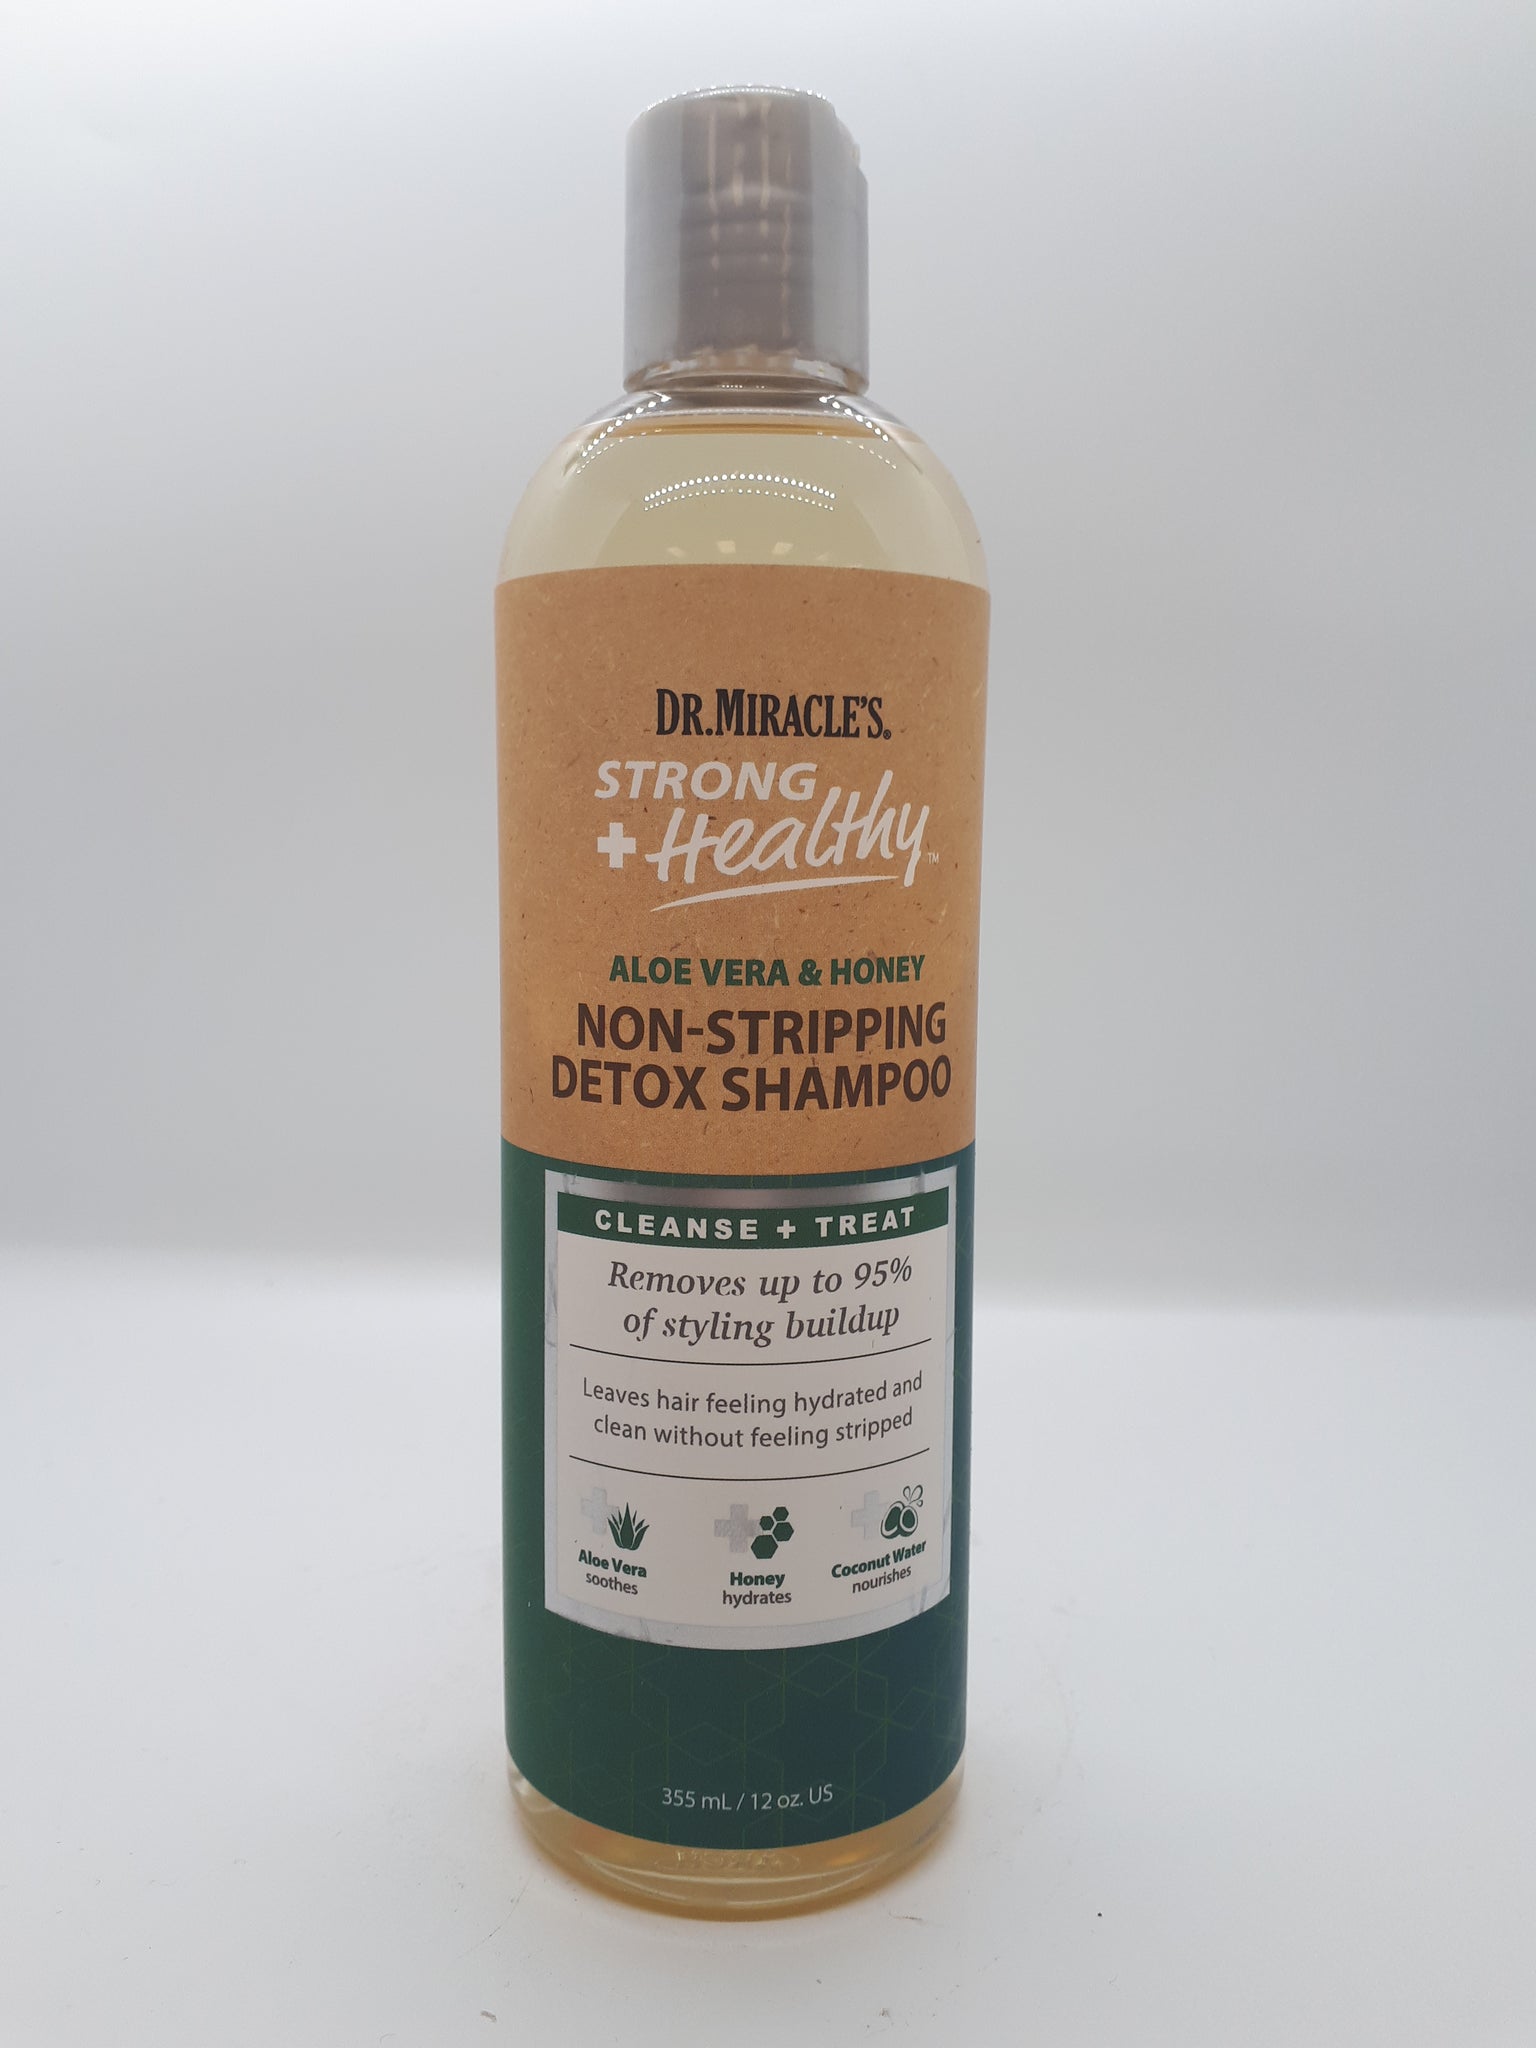 DR. MIRACLE’S NON-STRIPPING DETOX SHAMPOO